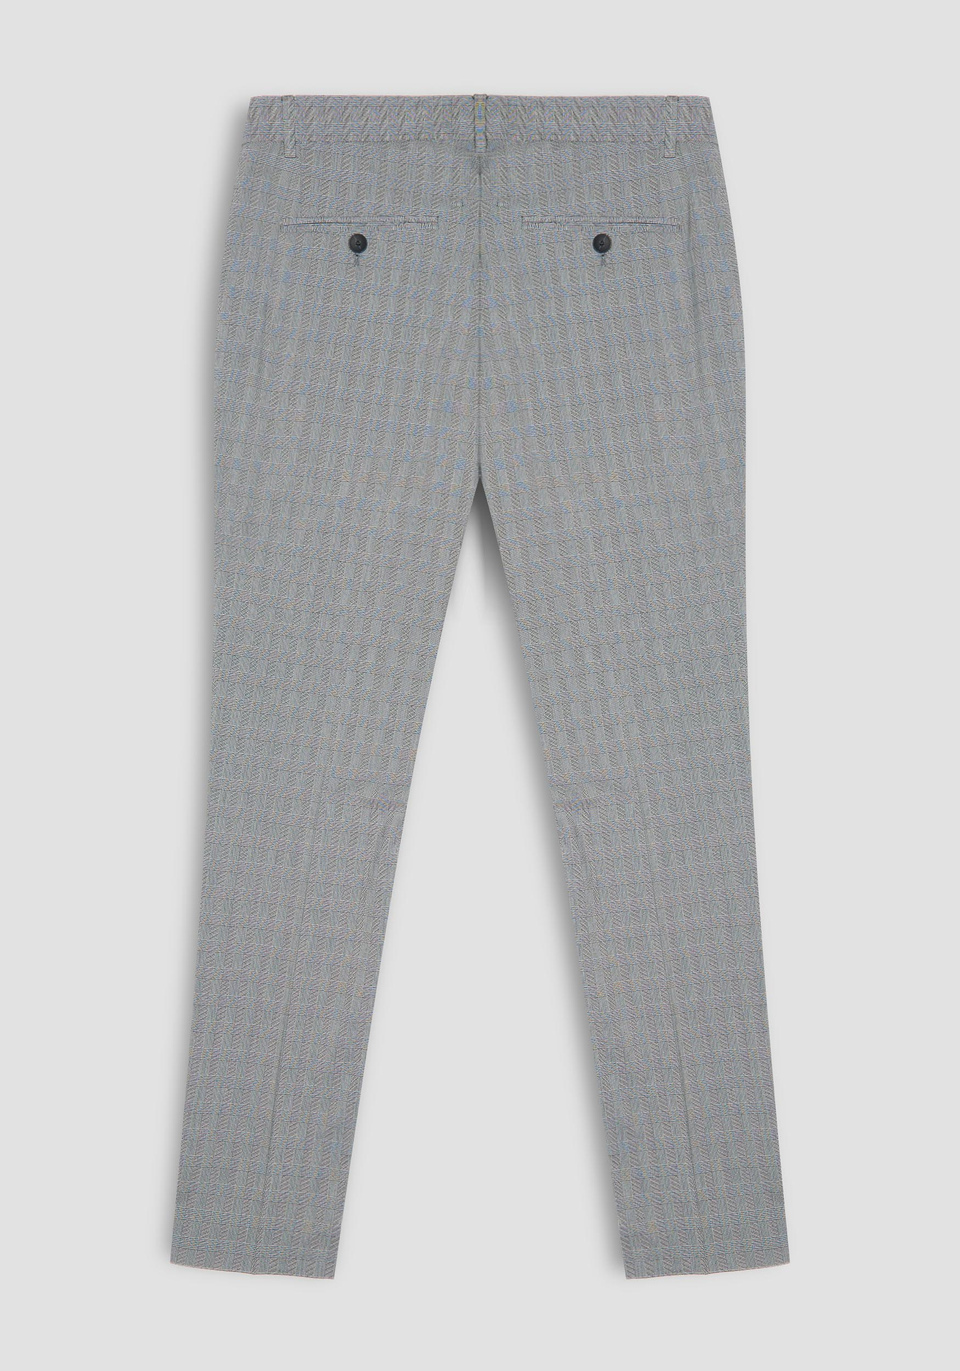 SKINNY-FIT “BRYAN” TROUSERS IN A STRETCHY COTTON YARN-DYED BLEND WITH A MICRO-WEAVE EFFECT - Antony Morato Online Shop